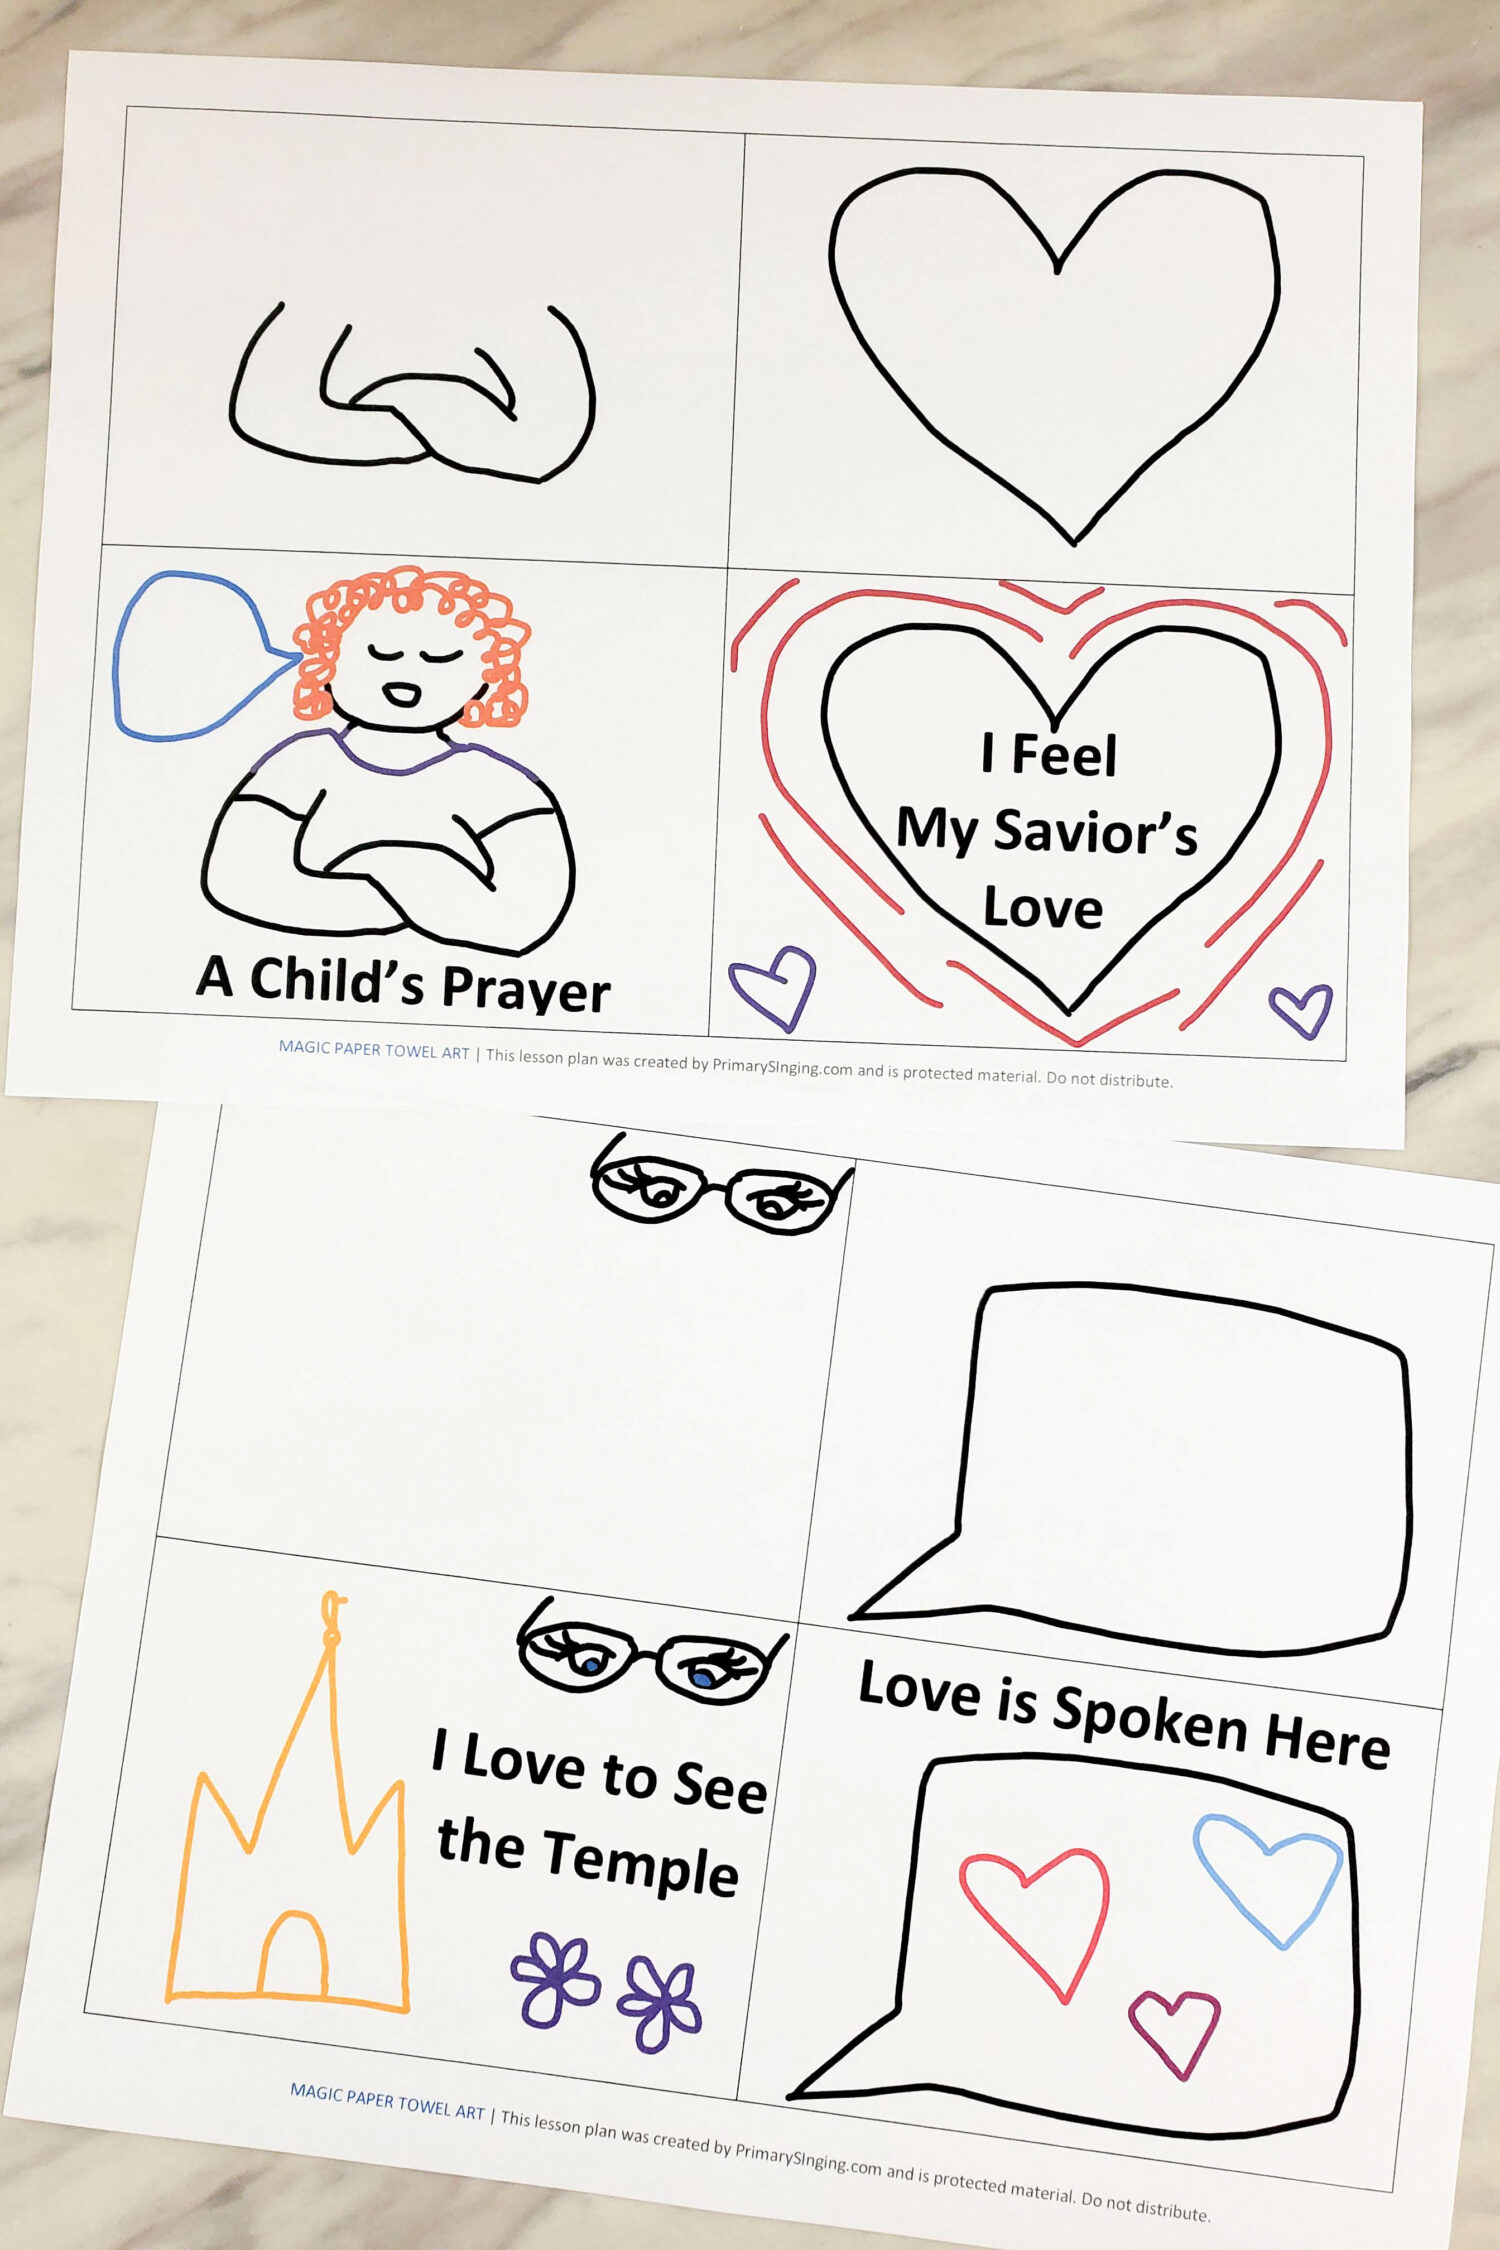 Magic Paper Towel Art song review game for Singing Time with any songs you'd like magically add colors with water. Ready with Valentine's Day song ideas or add your own  songs! Printable helps for LDS Primary music leaders.